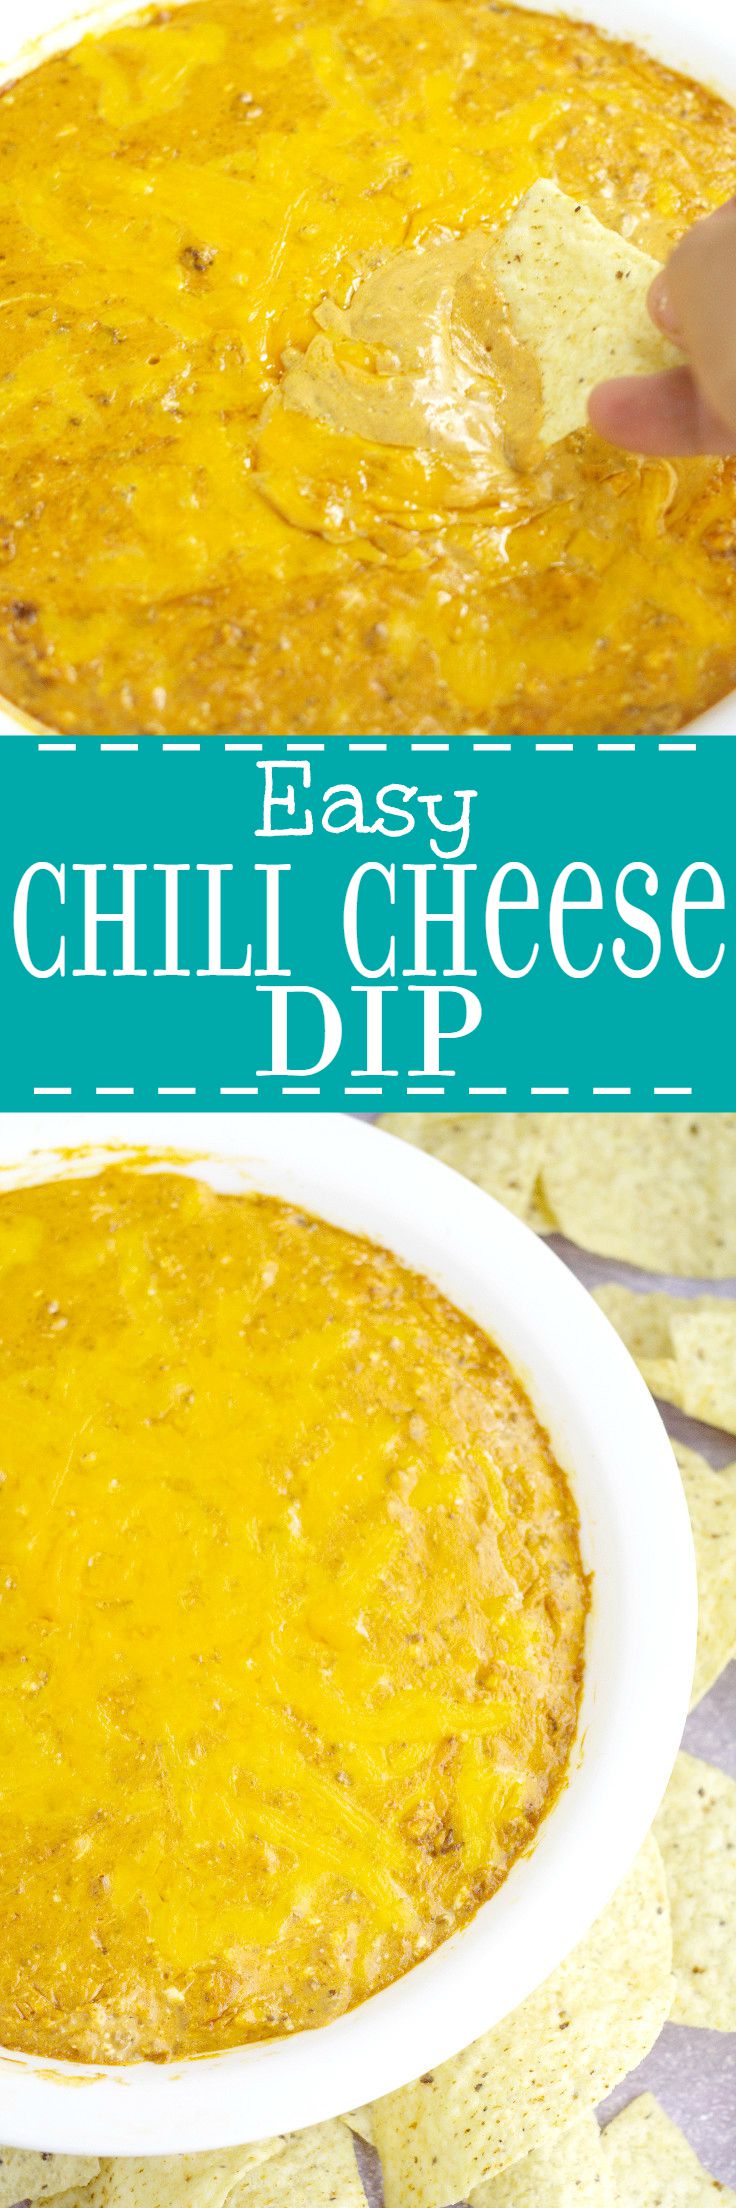 Super Easy Chili Cheese Dip Recipe- a crowd-pleasing, low-maintenance dip recipe and appetizer with gooey cheese and chili. Great for parties! This is one of my faves!